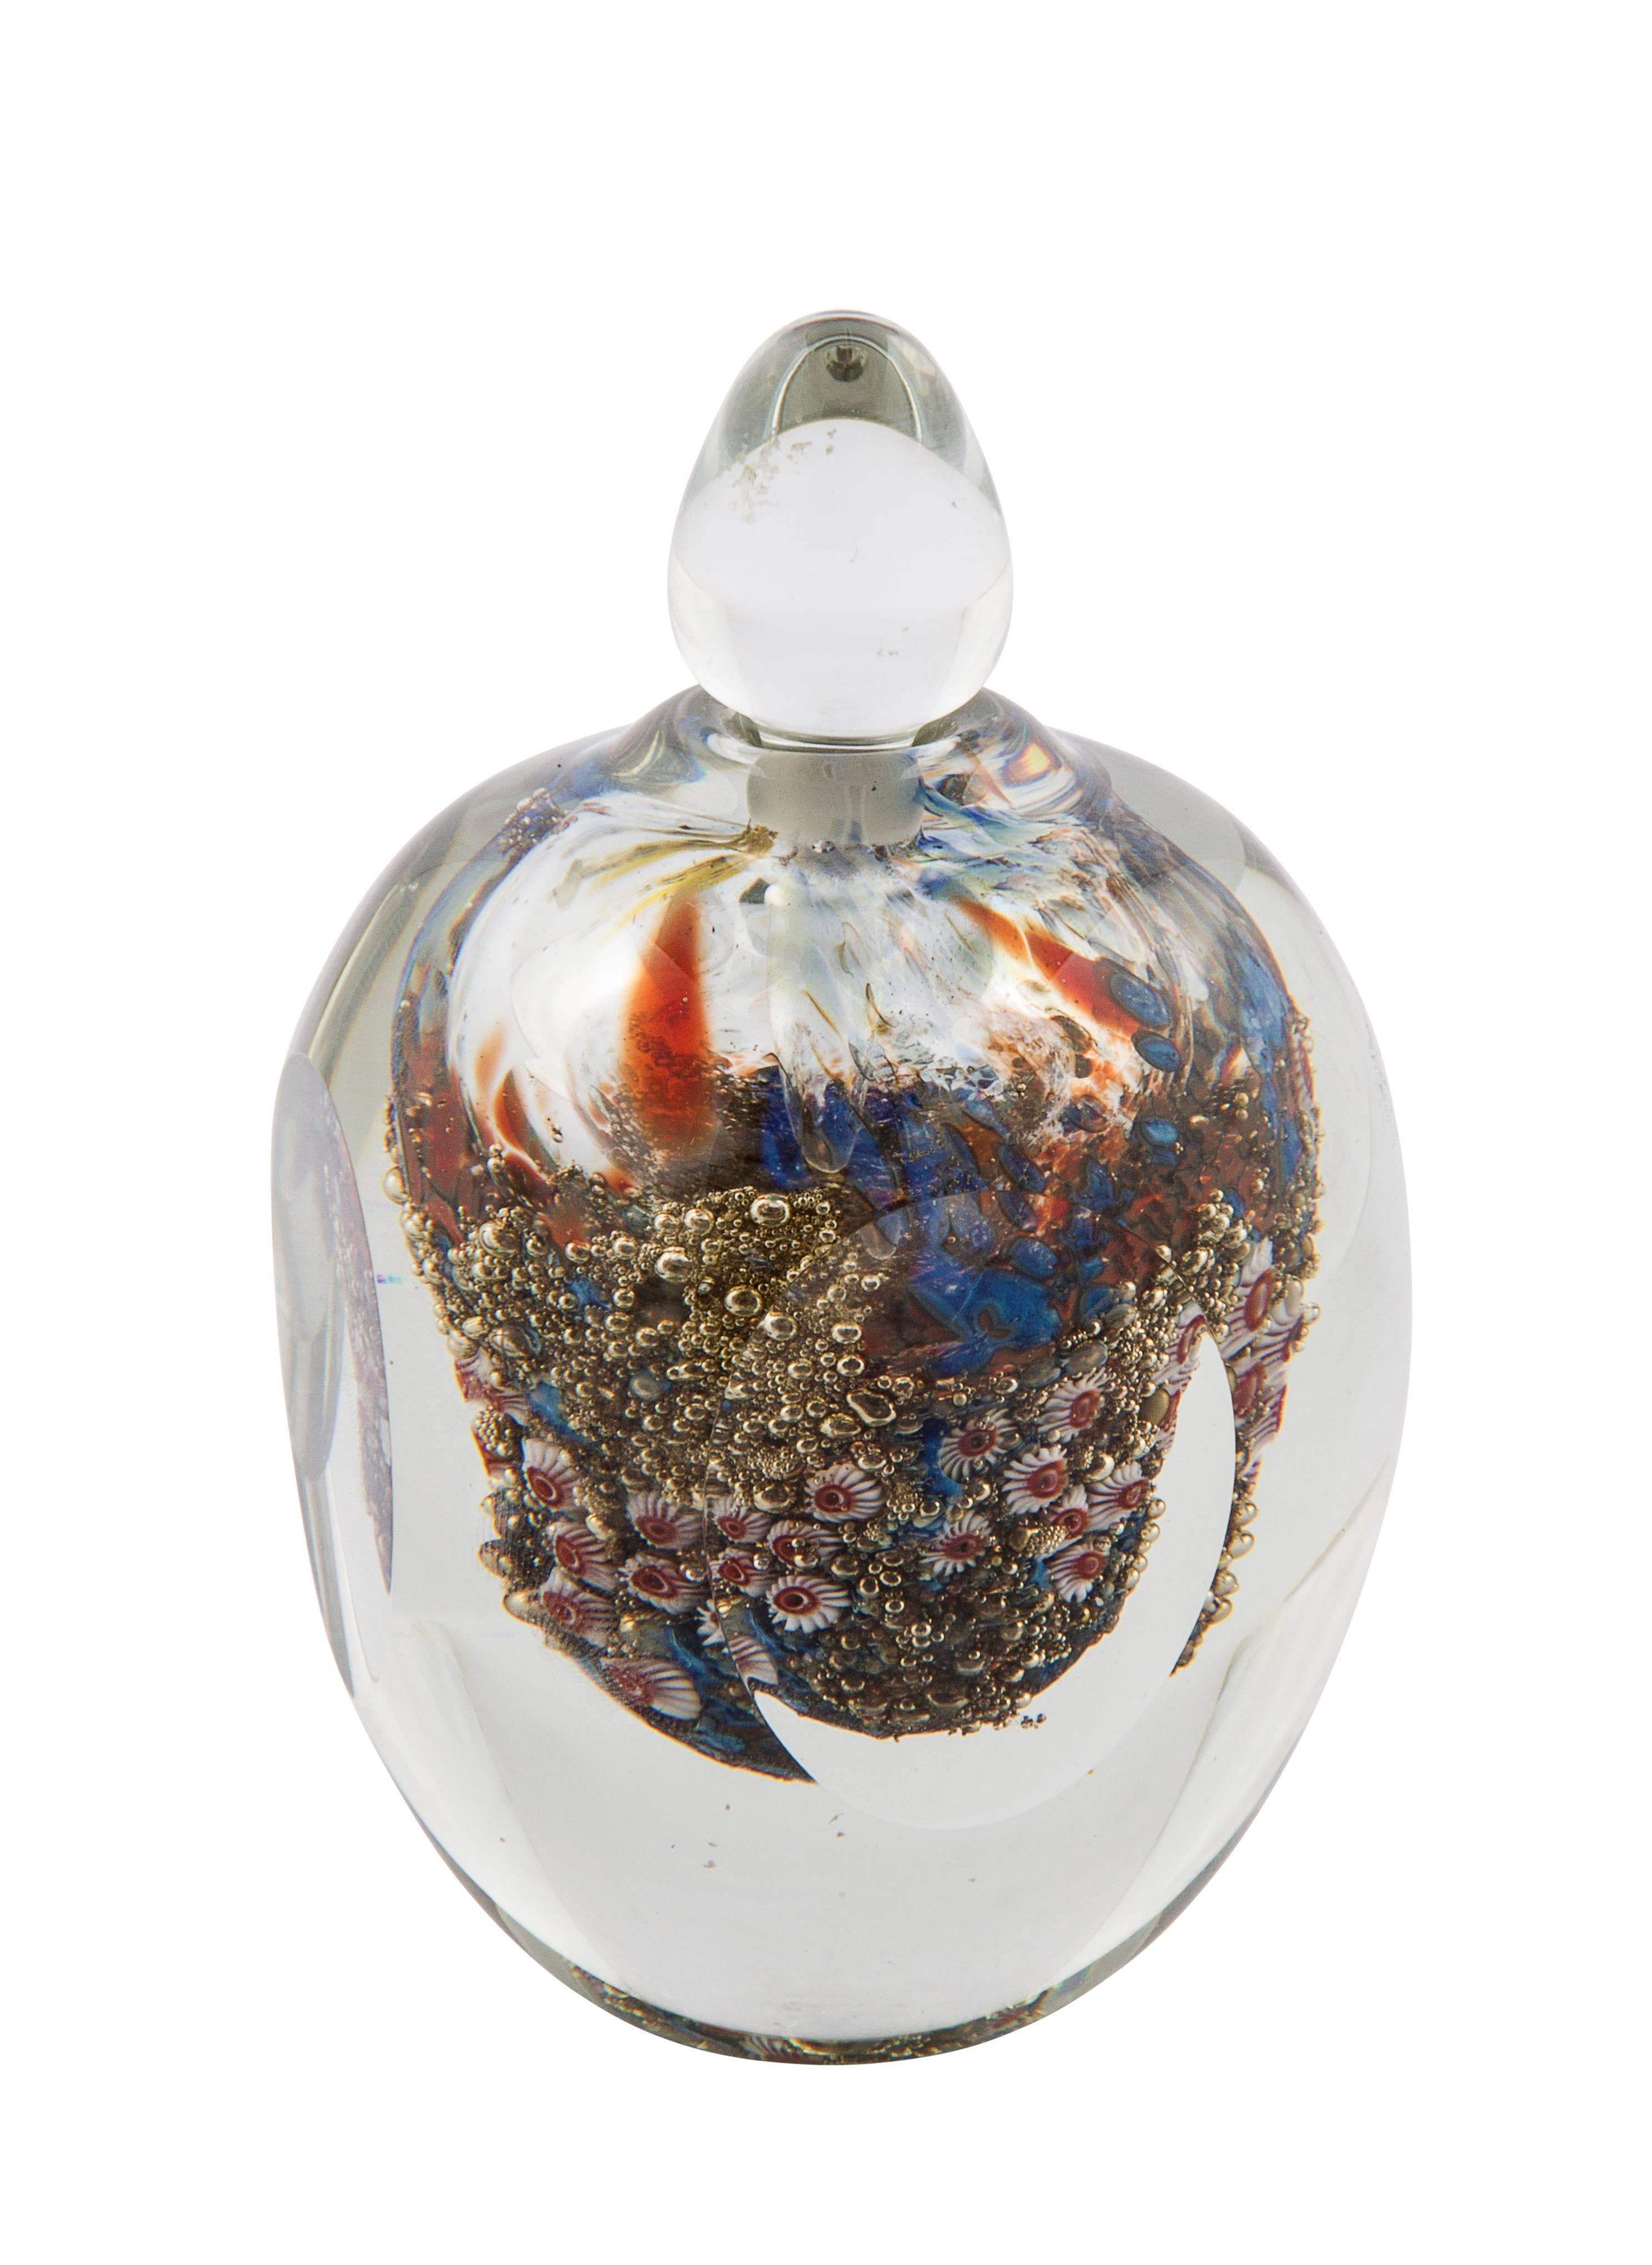 American Richard Satava studio glass scent bottle and stopper, of ovate from, cased as a paperweight, the interior with millifiori seaforms and corals, the ovoidal pointed stopper clear.

Signed to base R. Santoni and 005 86.
4 1/2